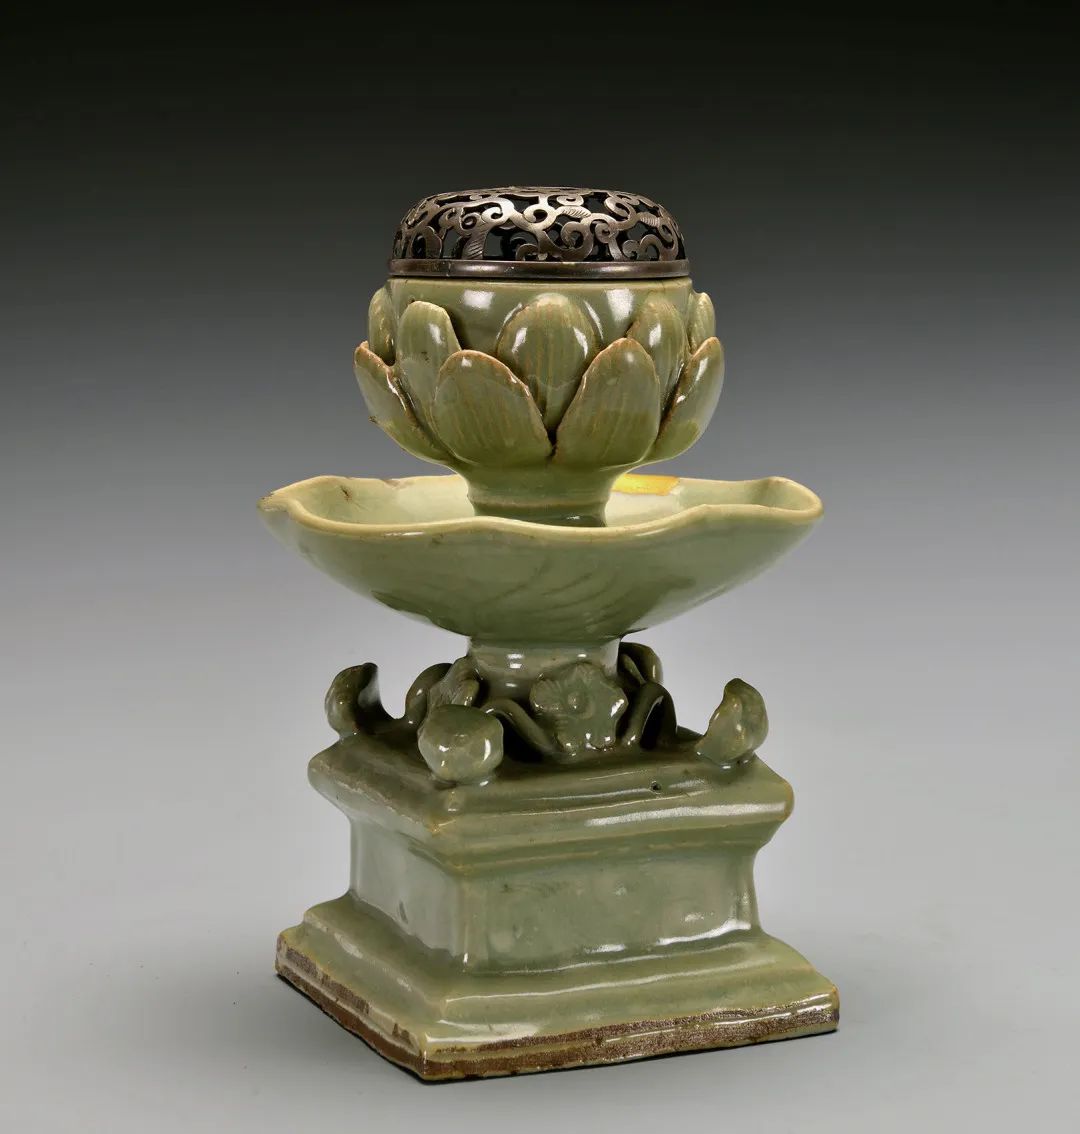 Ming Longquan celadon lotus-shaped lamp in the collection of Zhejiang Provincial Museum